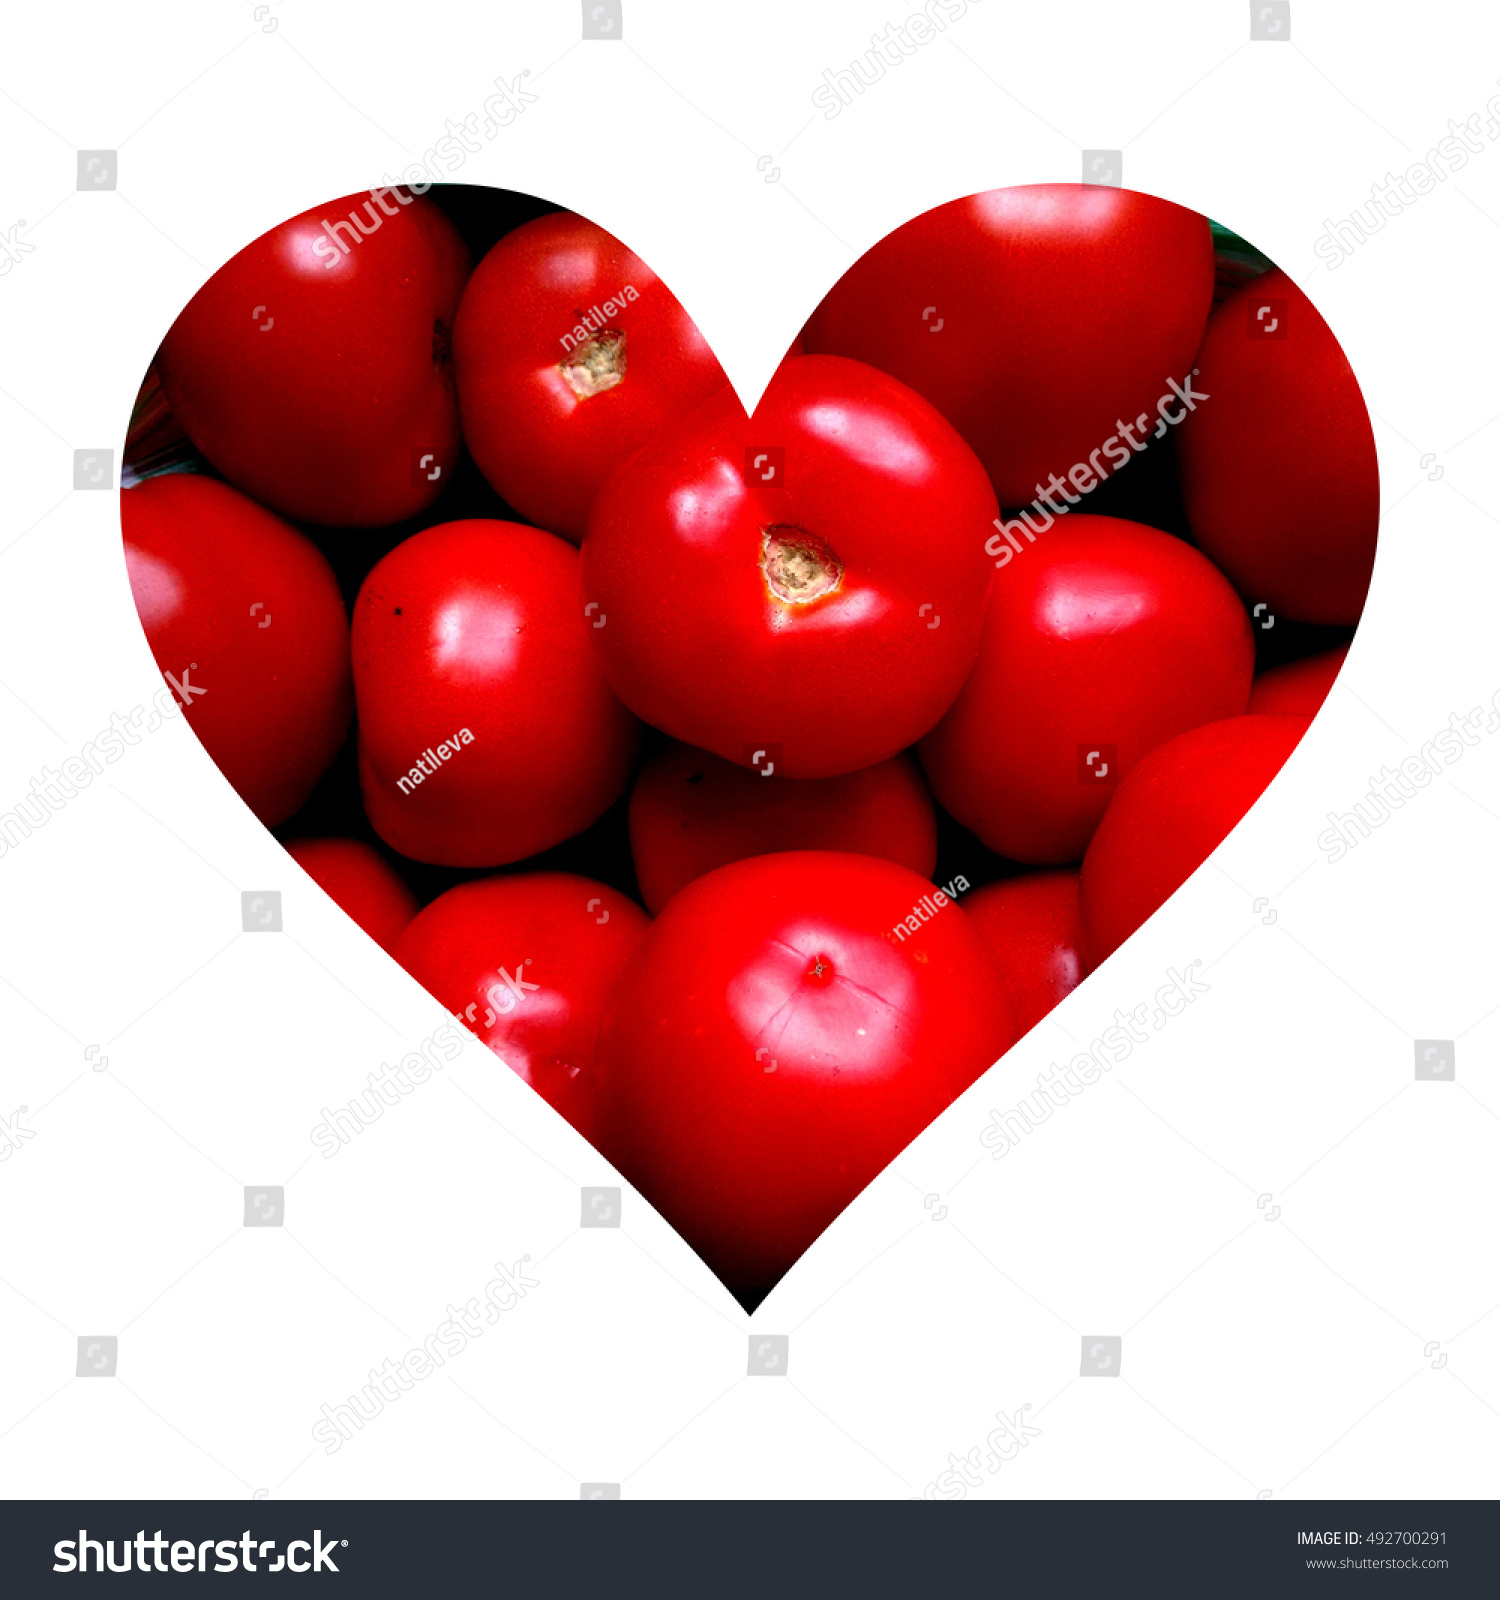 Simple heart shape filled with tomatoes texture #492700291